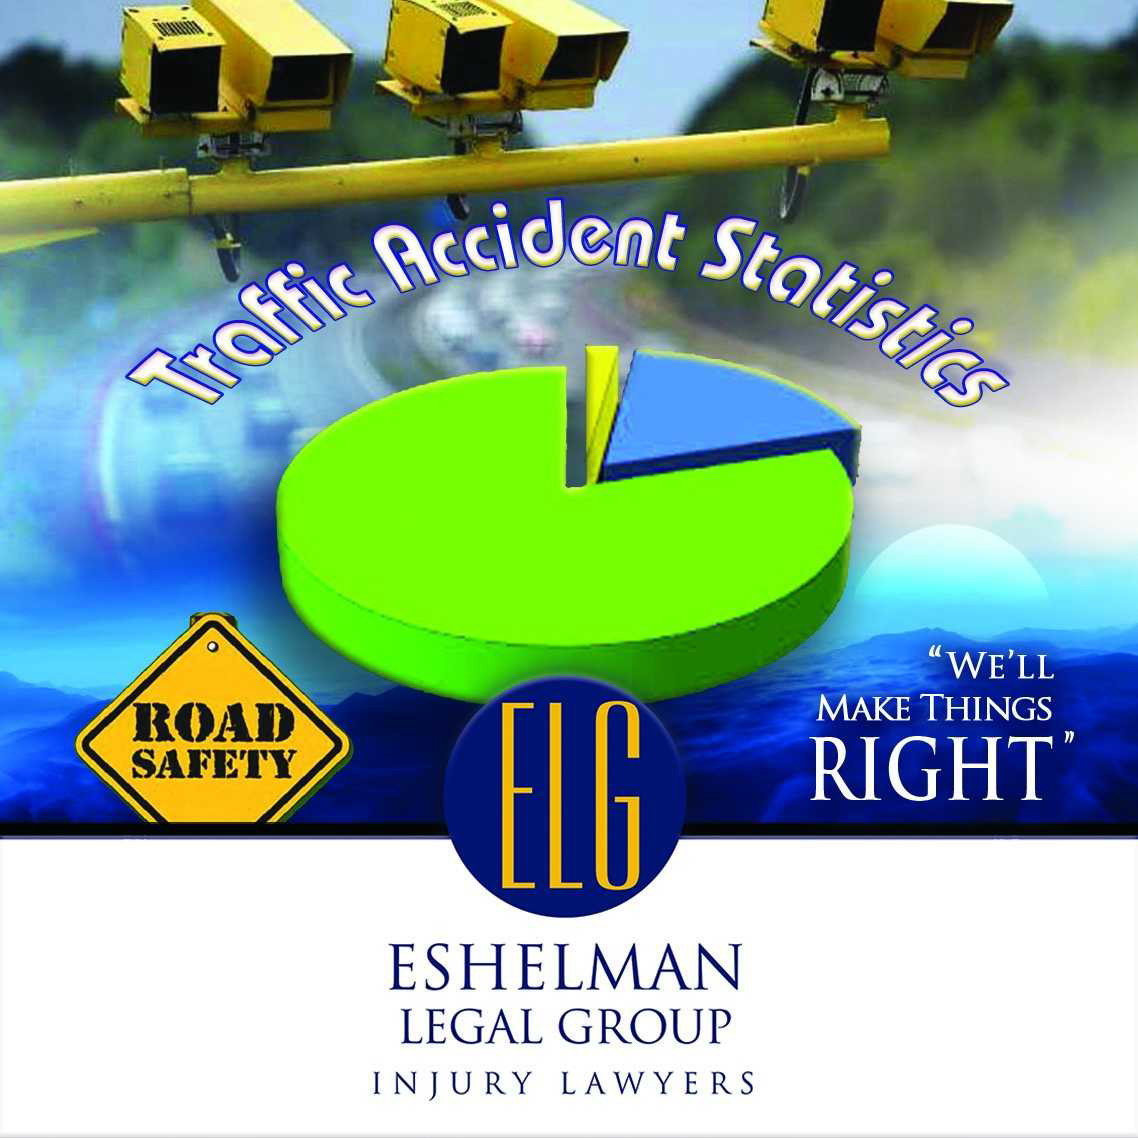 Serious Traffic Accident Statistics for Ohio | Personal Injury Lawyers Ohio, ELG